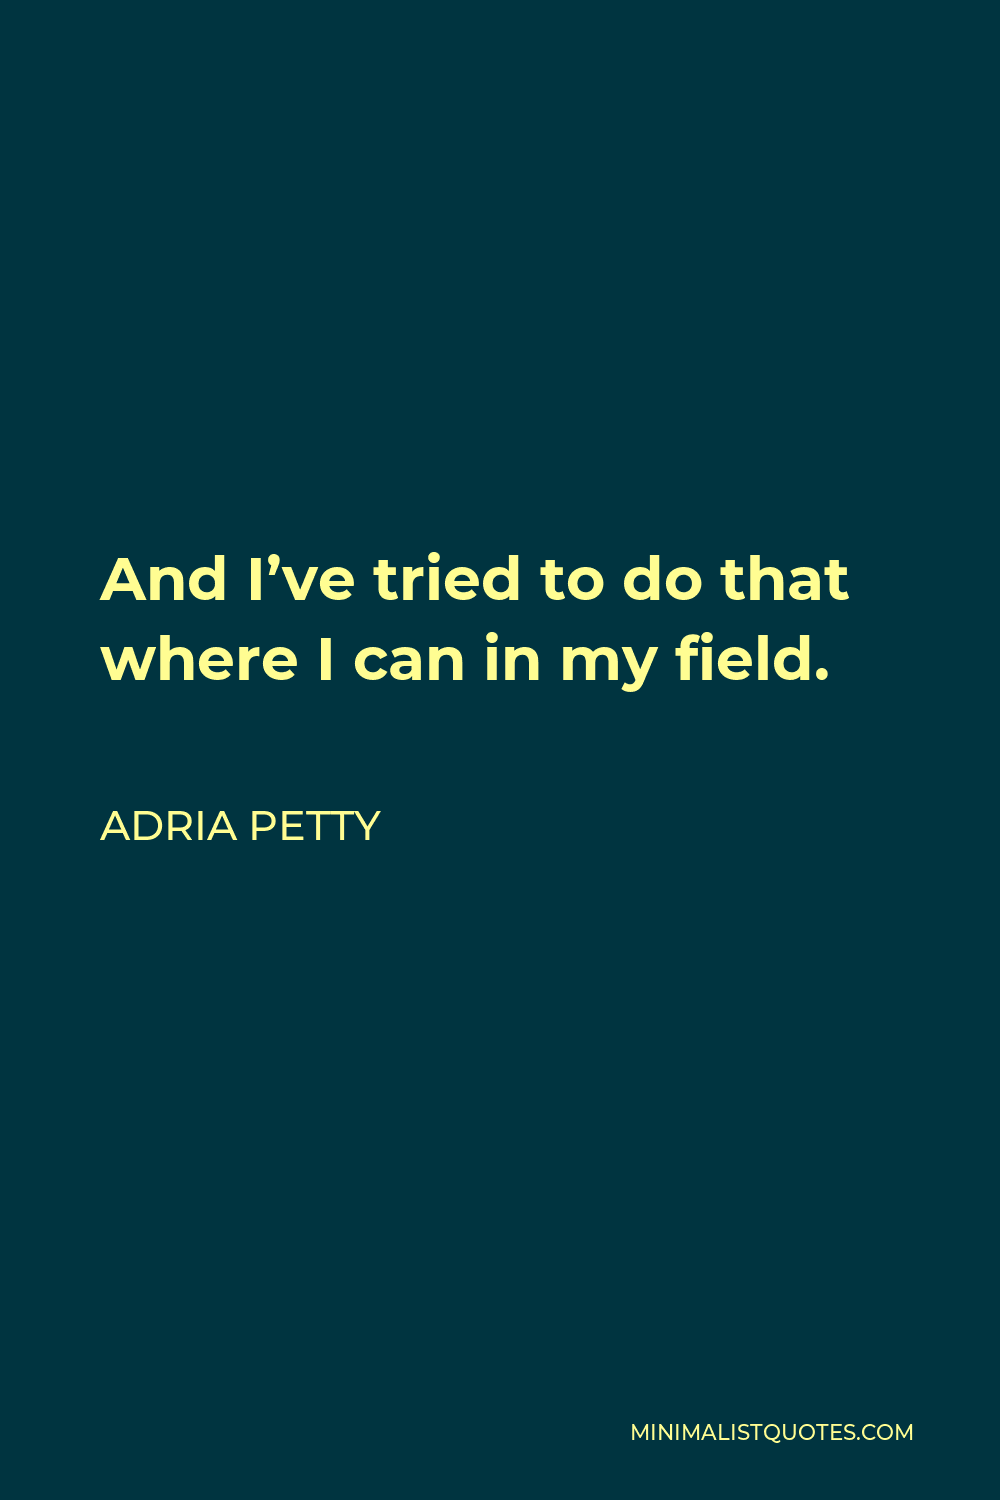 Adria Petty Quote - And I’ve tried to do that where I can in my field.